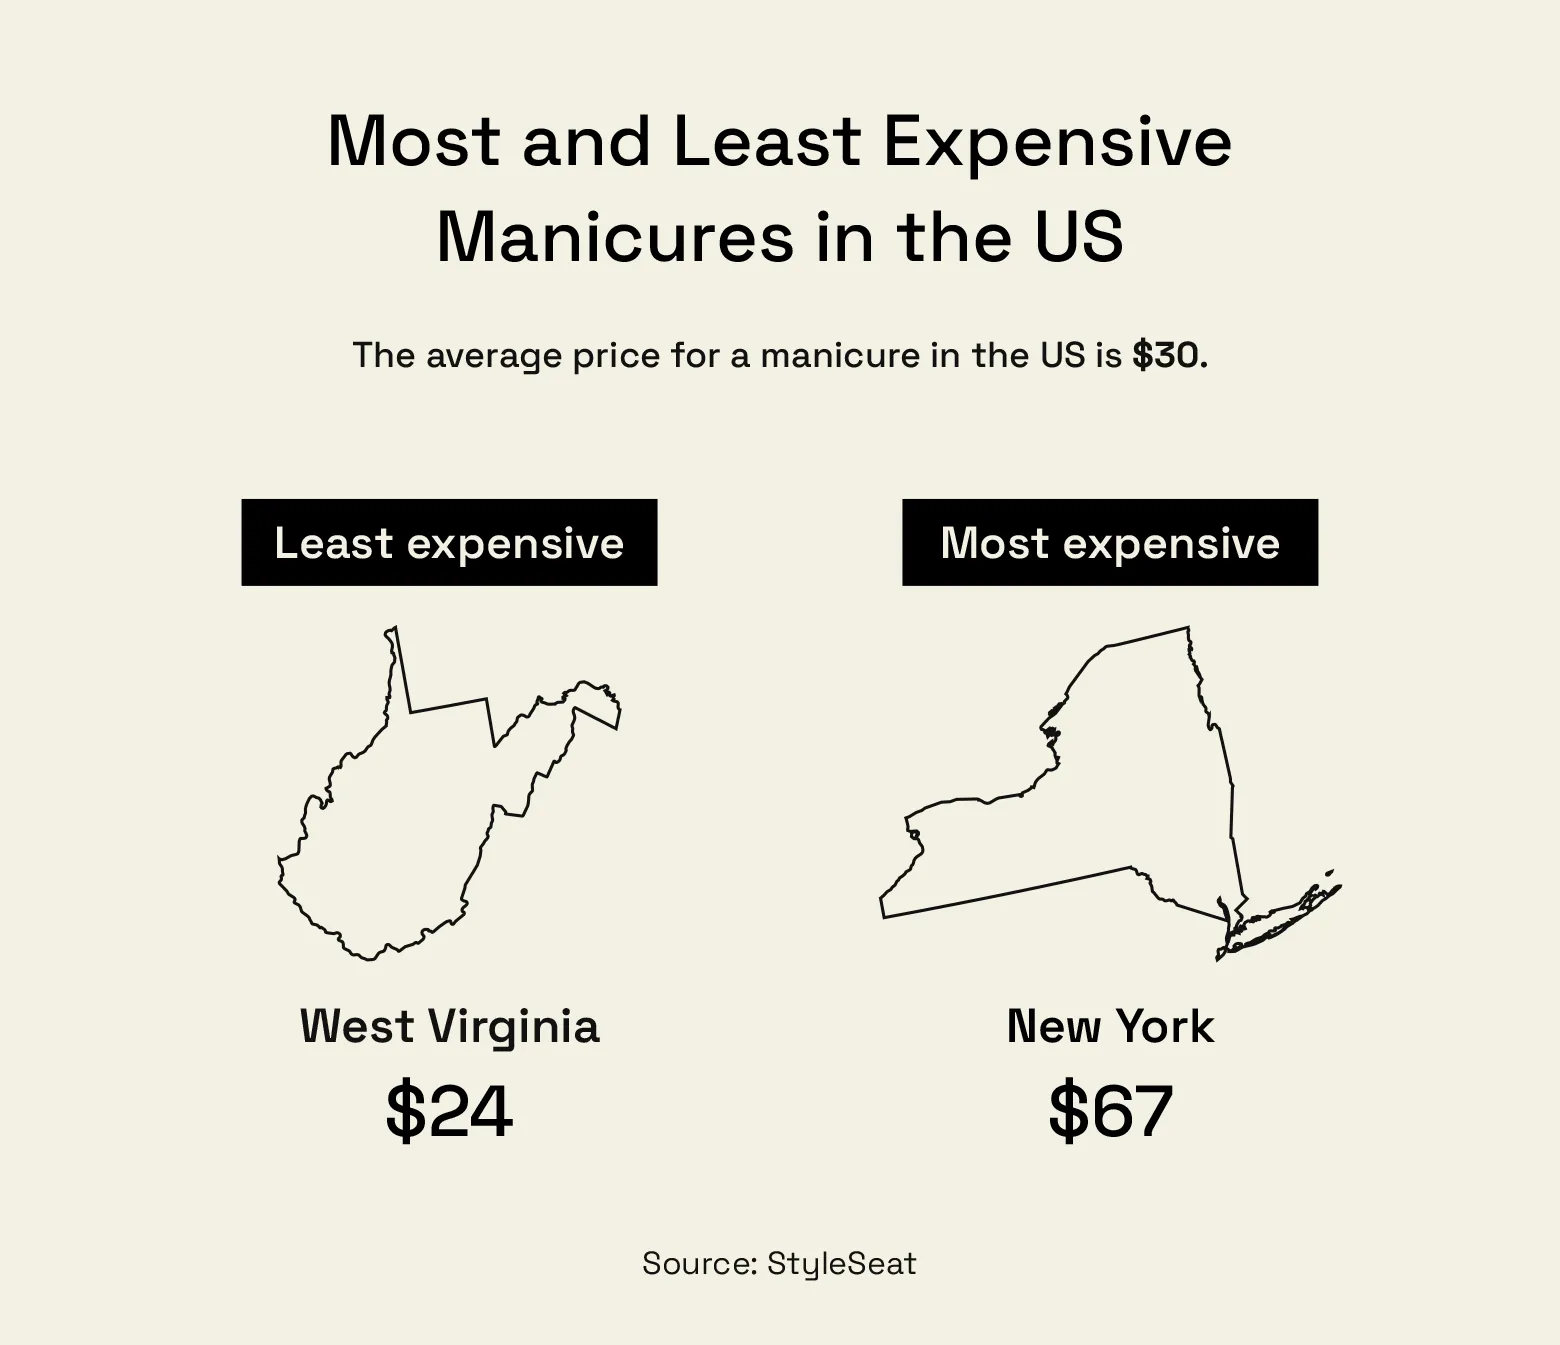 The least expensive average price for a manicure in the United Sates is West Virginia at $24. The most expensive average price is New York at $67.